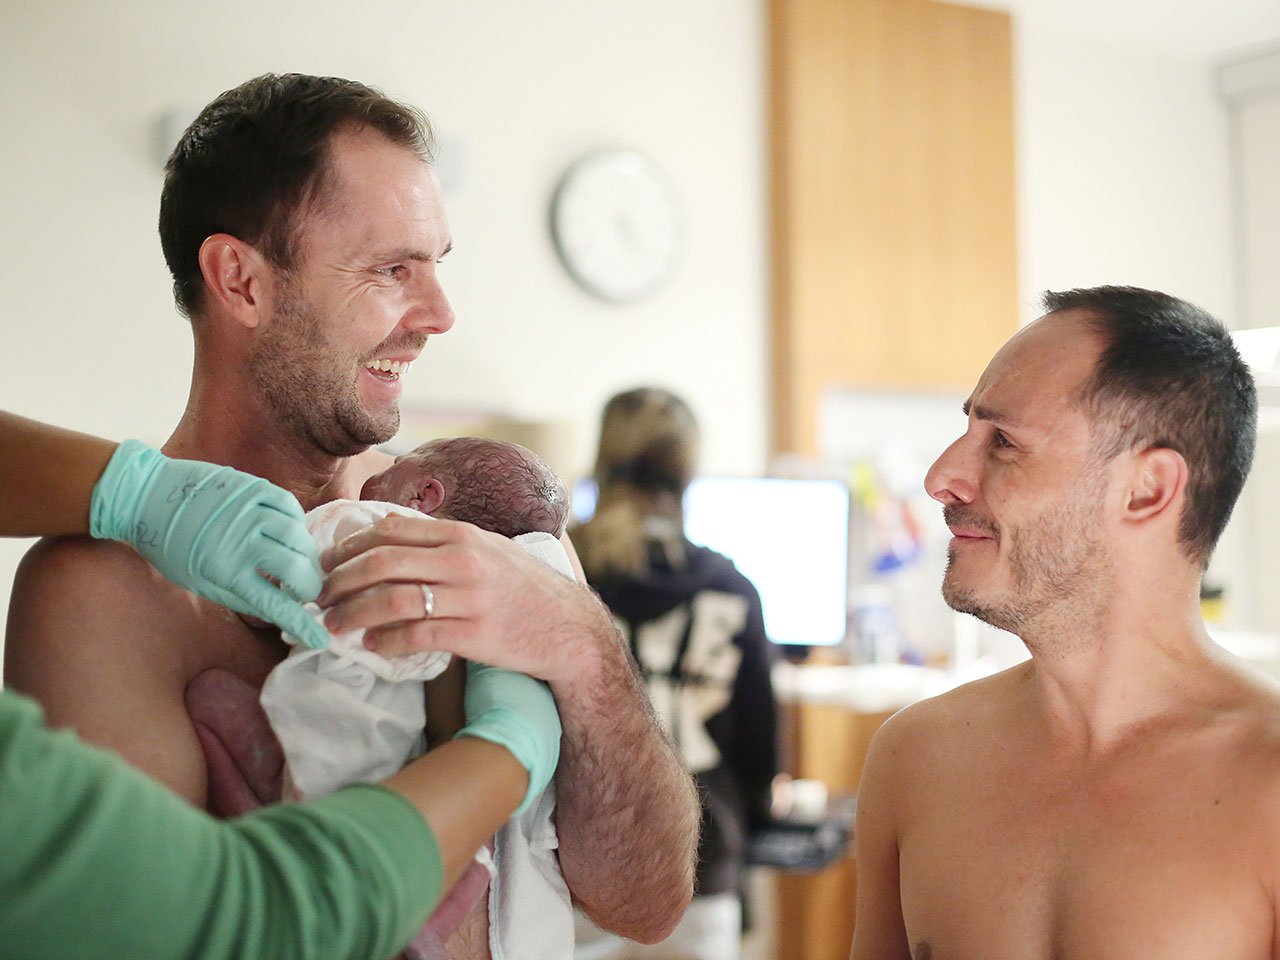 The author and his partner holding their new baby at the hospital